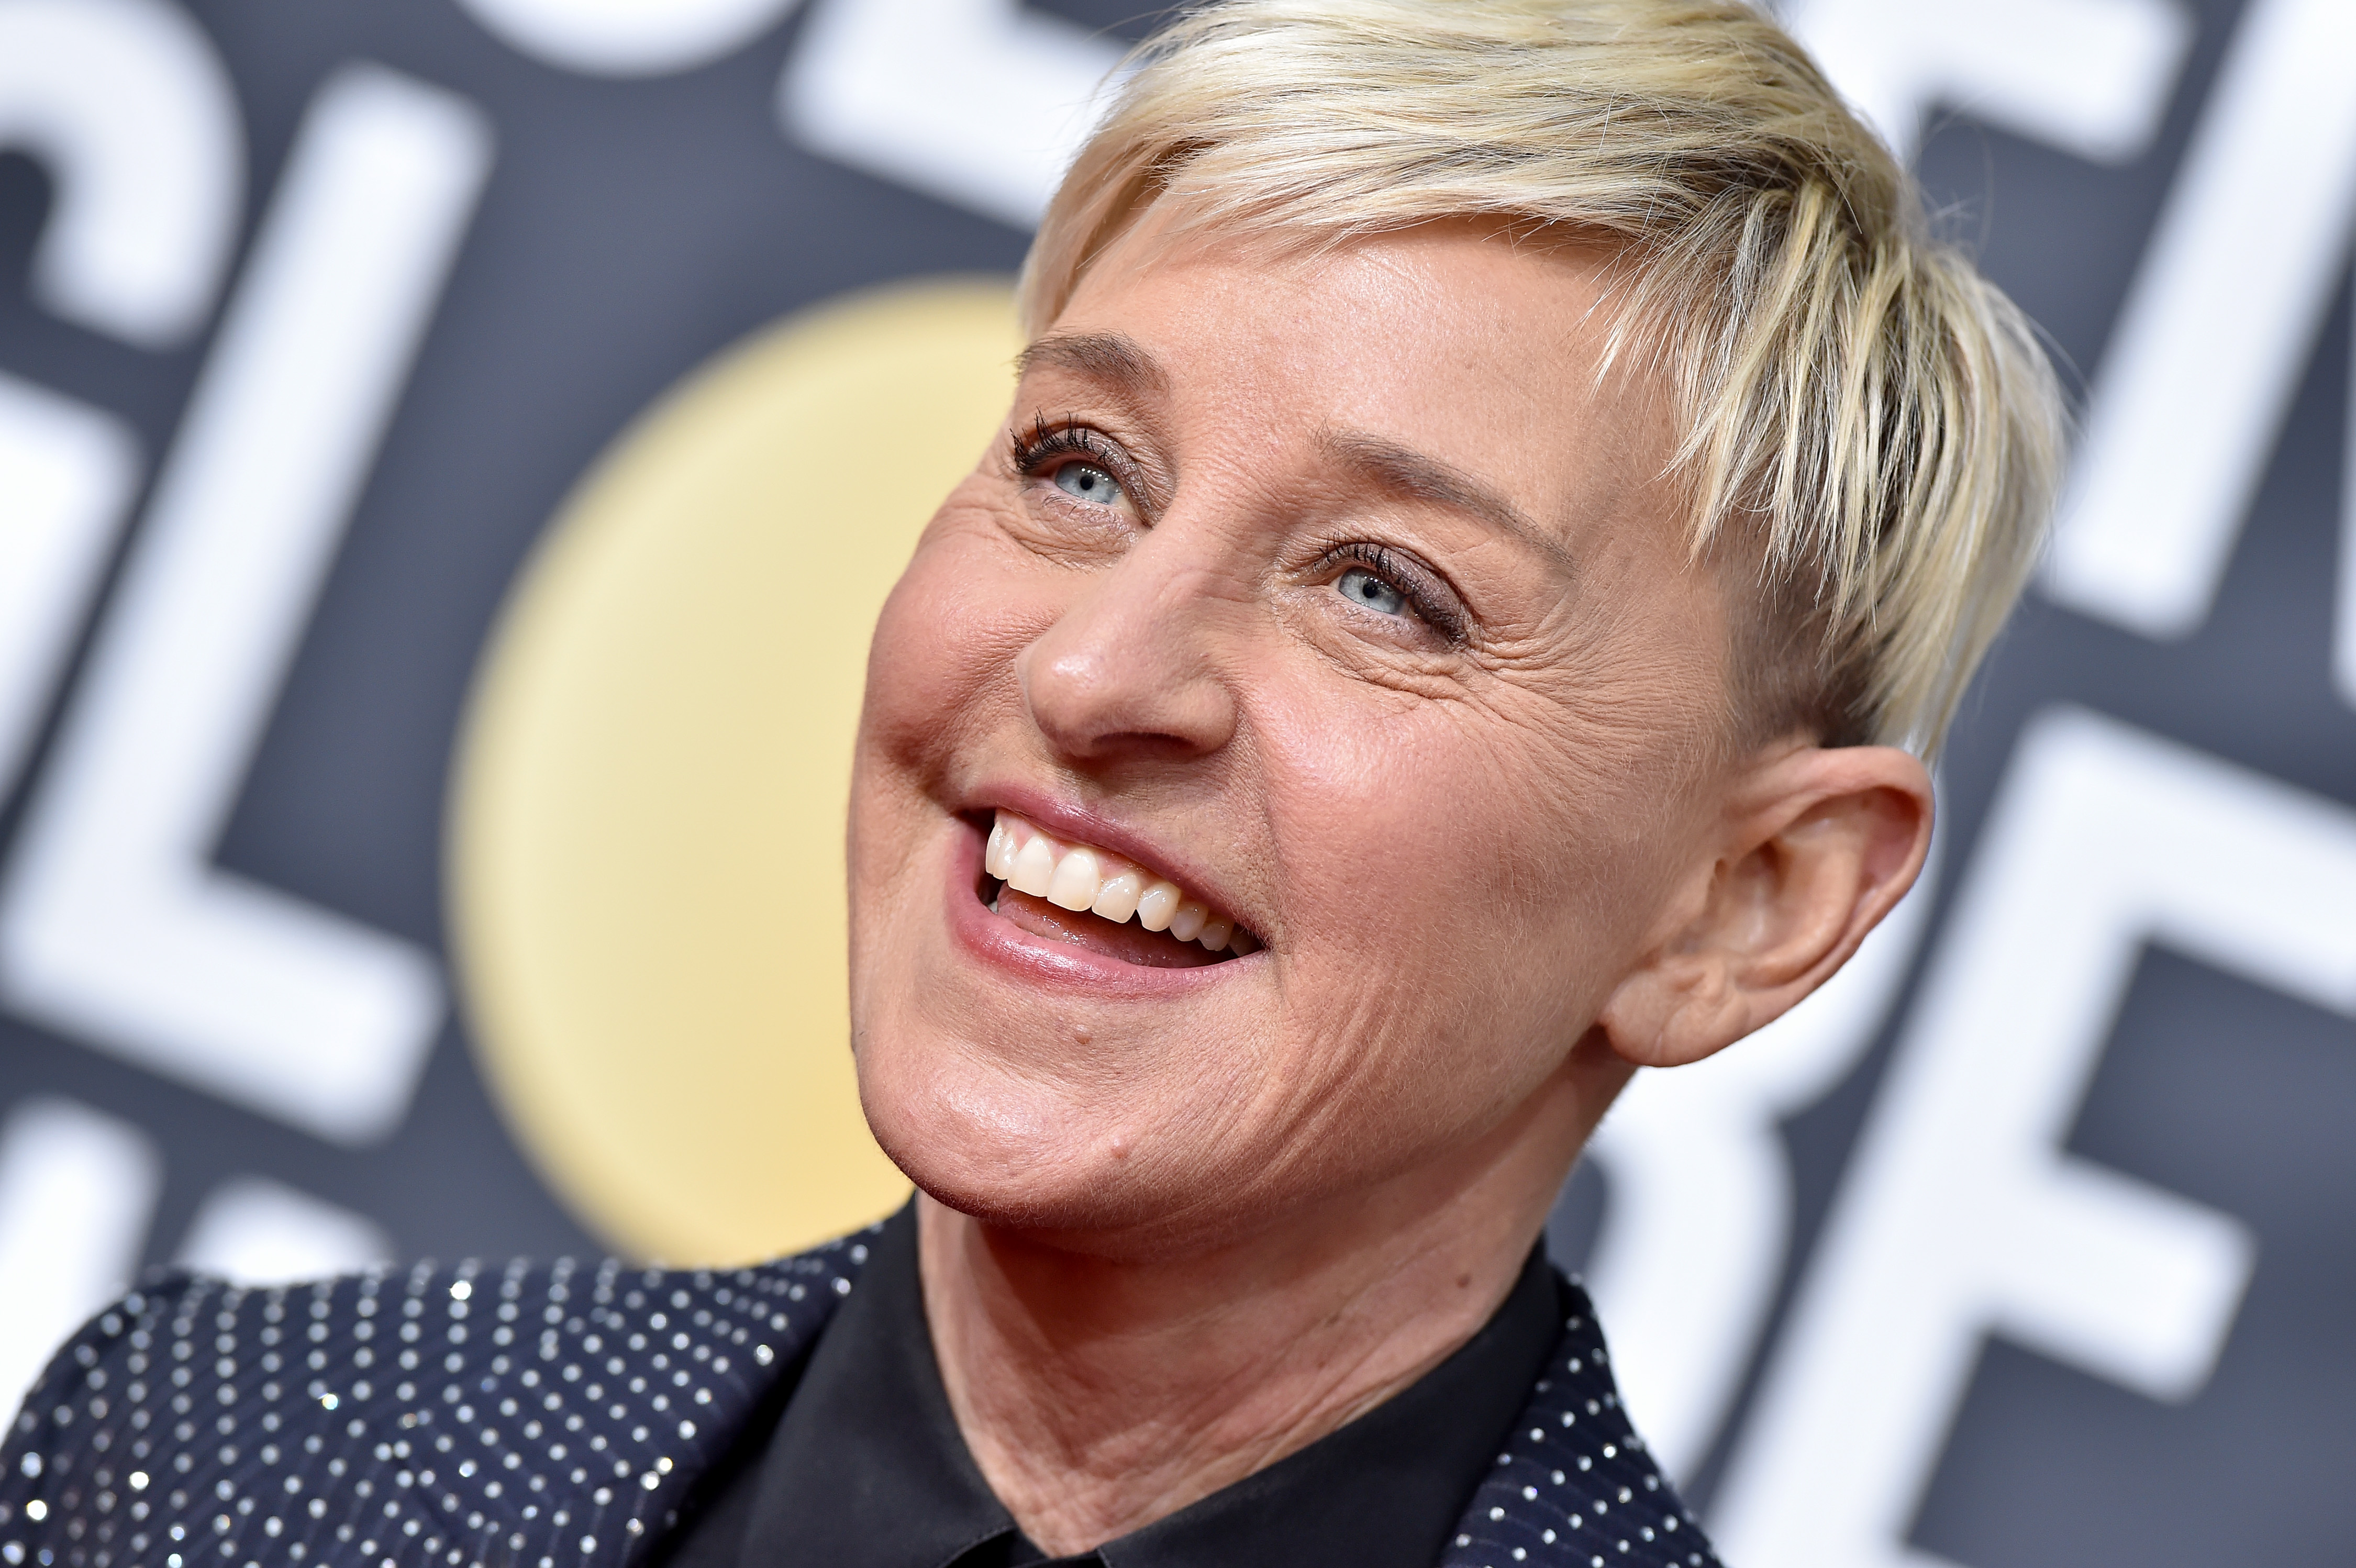 Ellen DeGeneres attends the 77th Annual Golden Globe Awards at The Beverly Hilton Hotel on January 05, 2020 in Beverly Hills, California